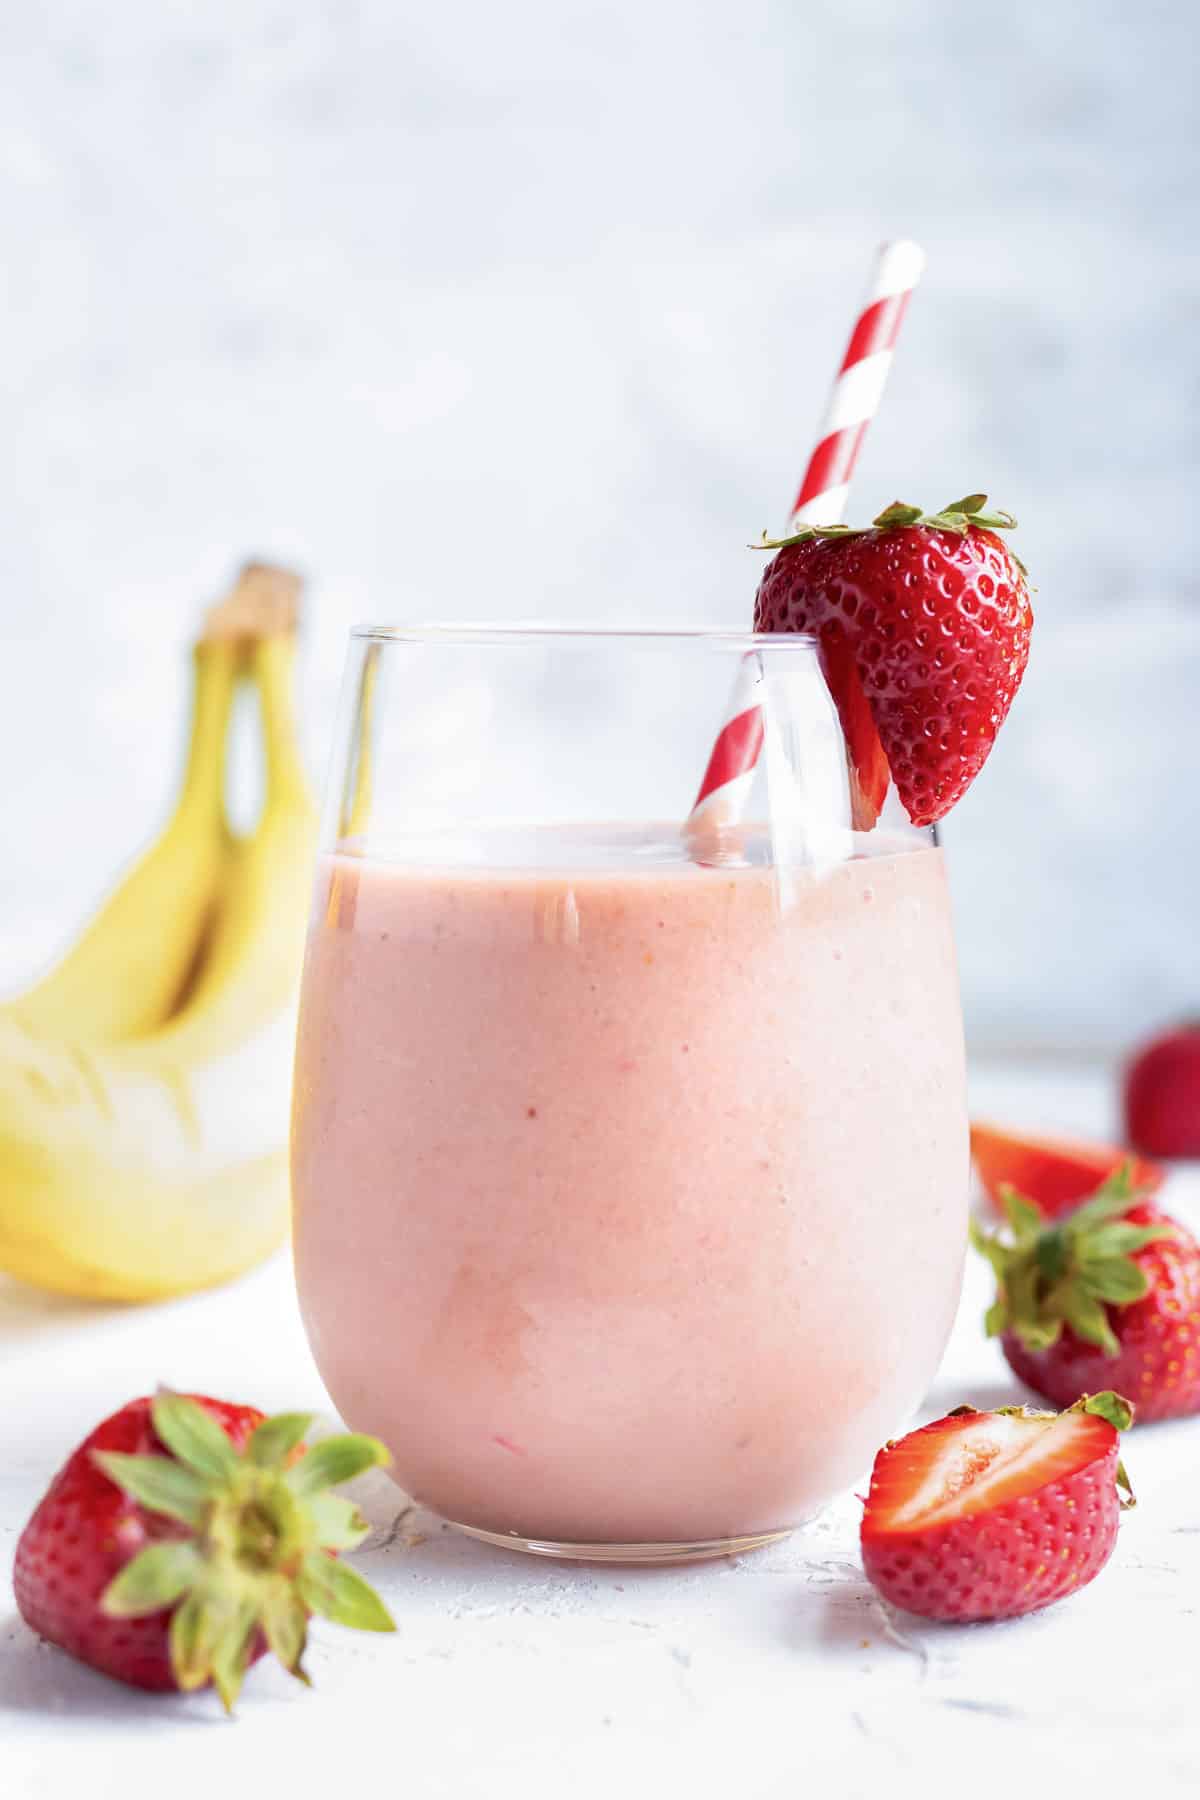 A serving of an easy and healthy smoothie in a glass with a straw.